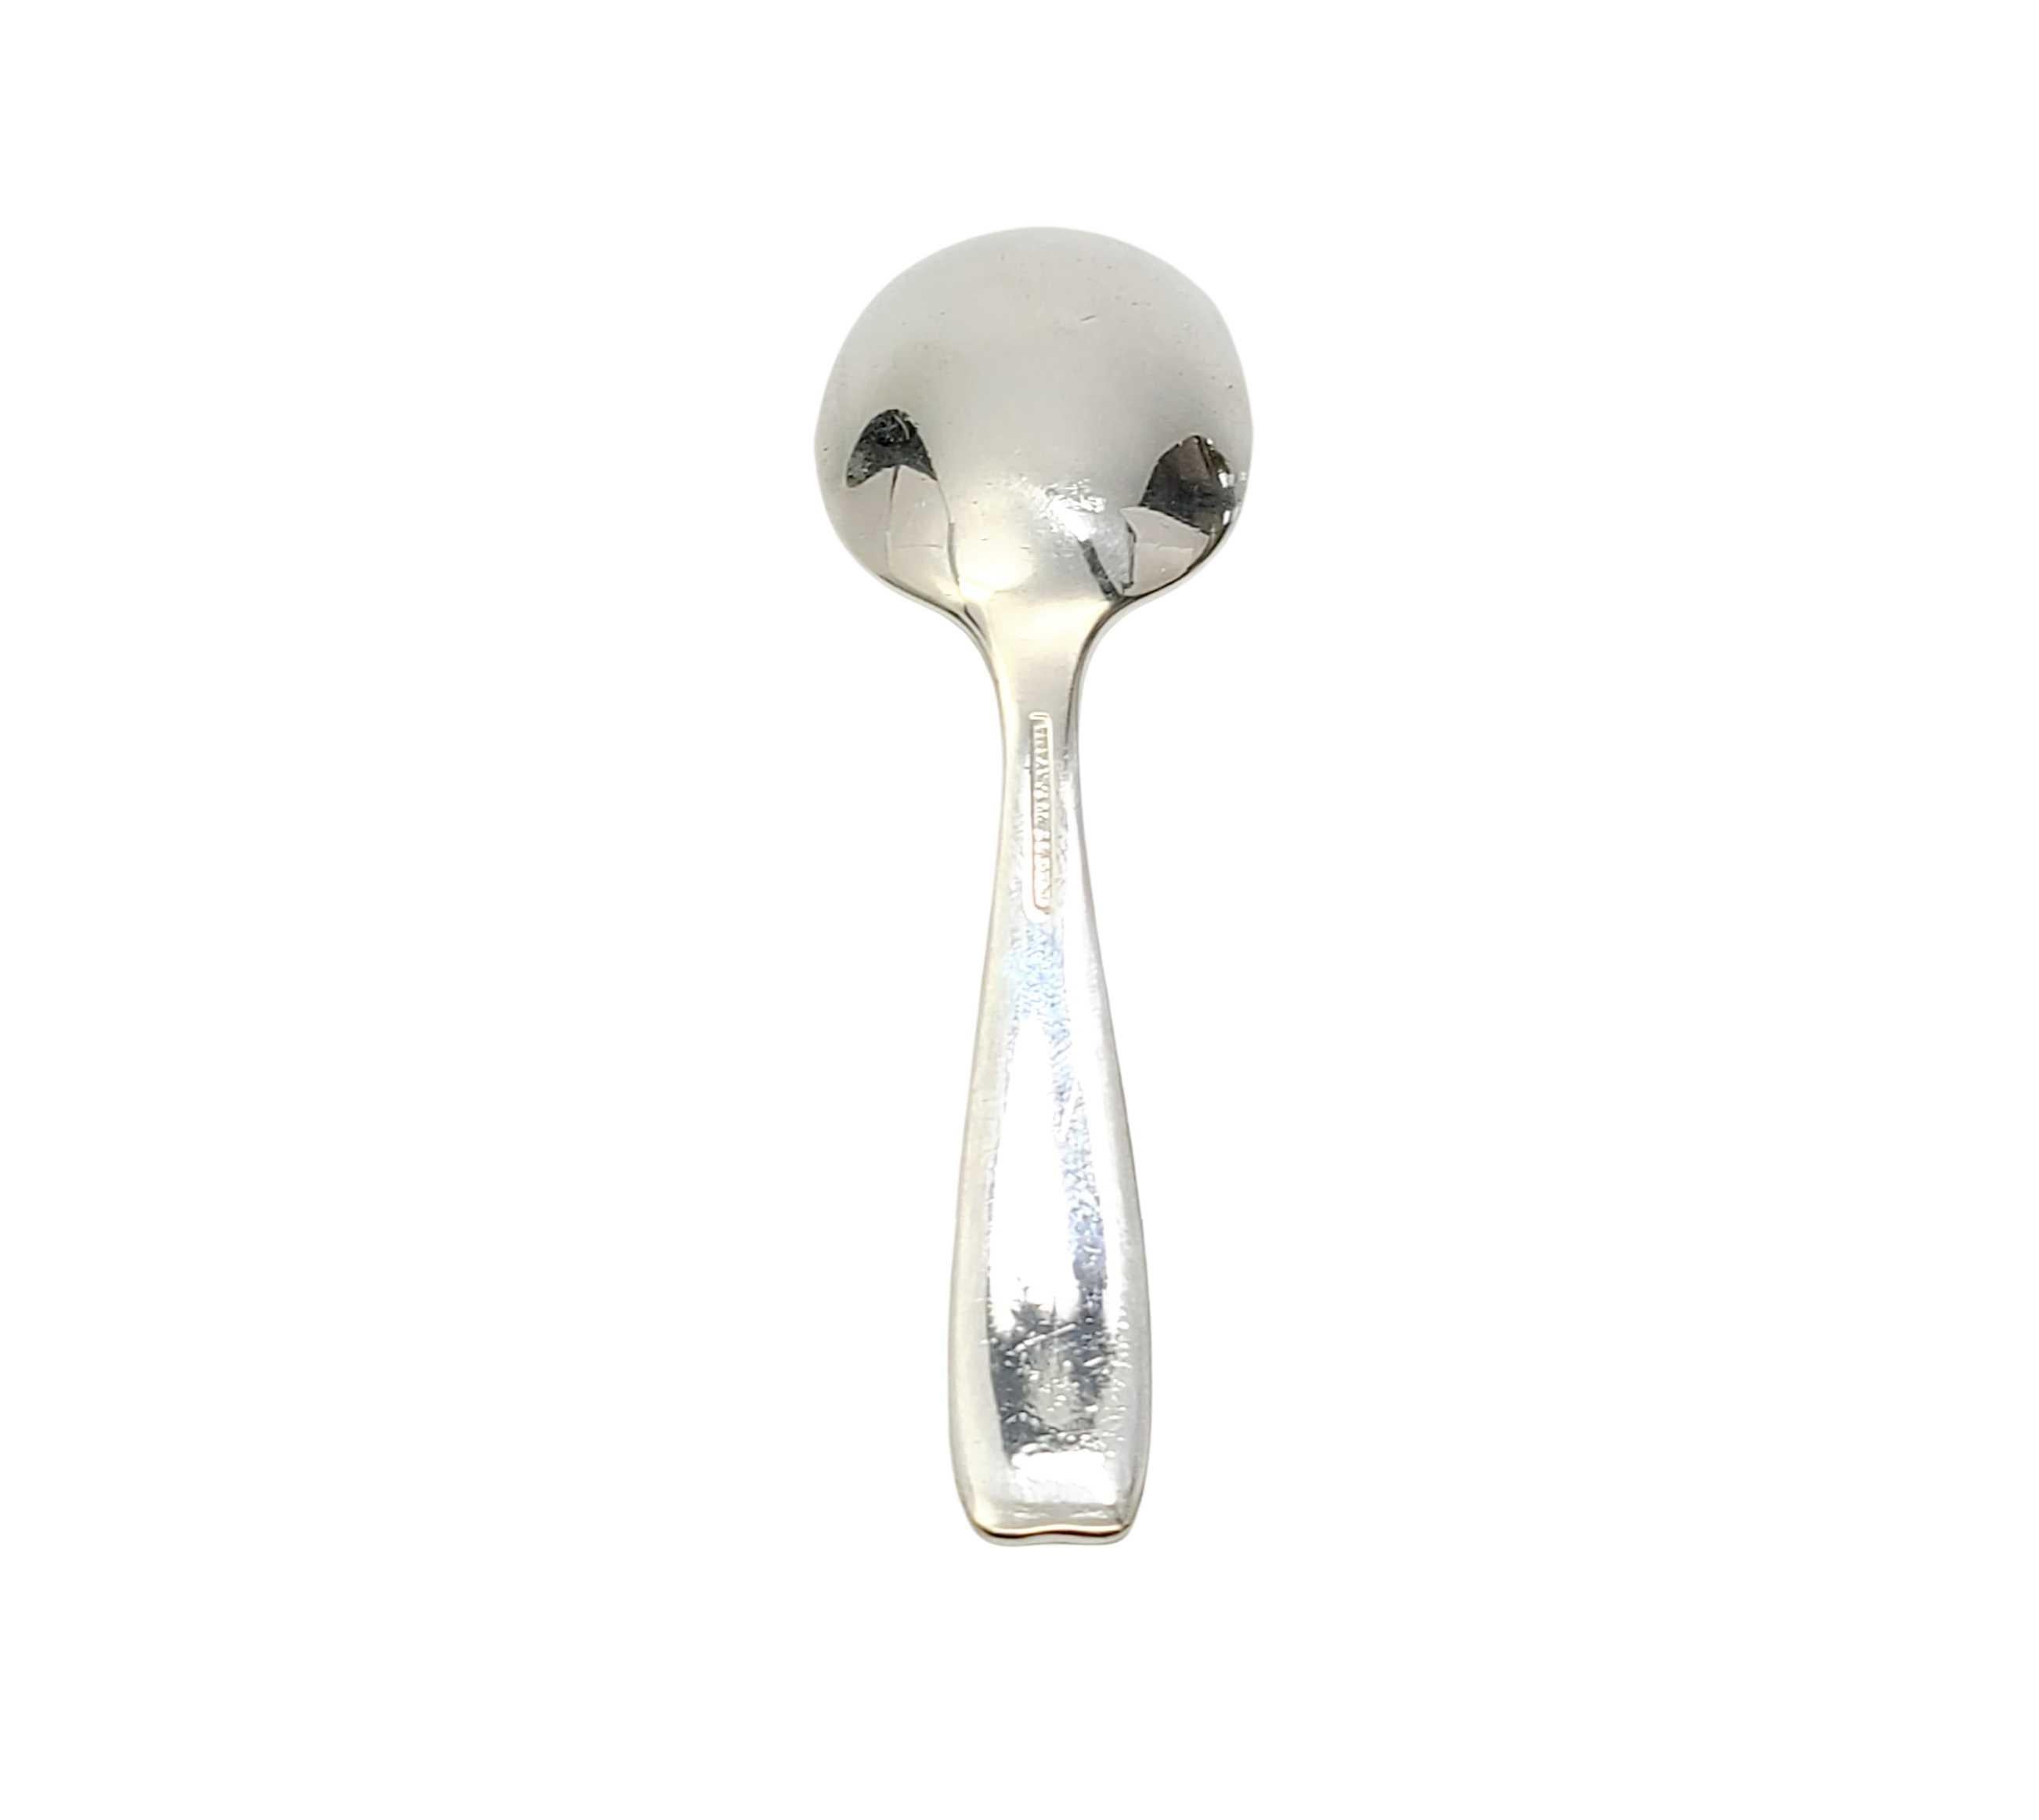 Tiffany & Co. sterling silver baby feeding spoon in the Cordis pattern.

Cordis is a simple and Classic design. No monogram or engraving. Does not include Tiffany & Co. box or pouch. The M mark on this spoon dates it to manufacture under the